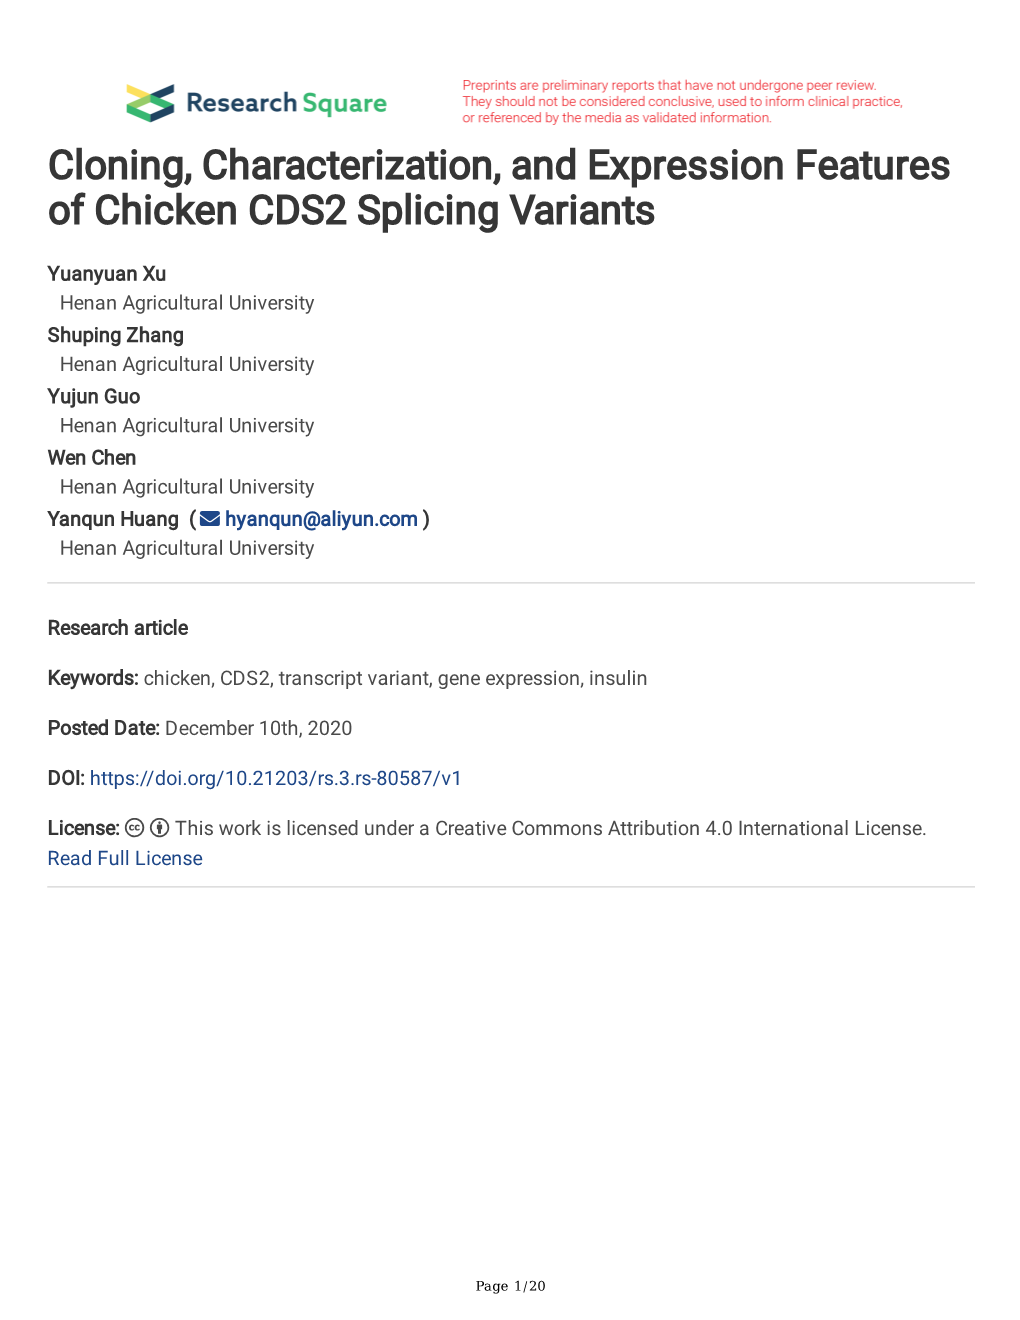 Cloning, Characterization, and Expression Features of Chicken CDS2 Splicing Variants